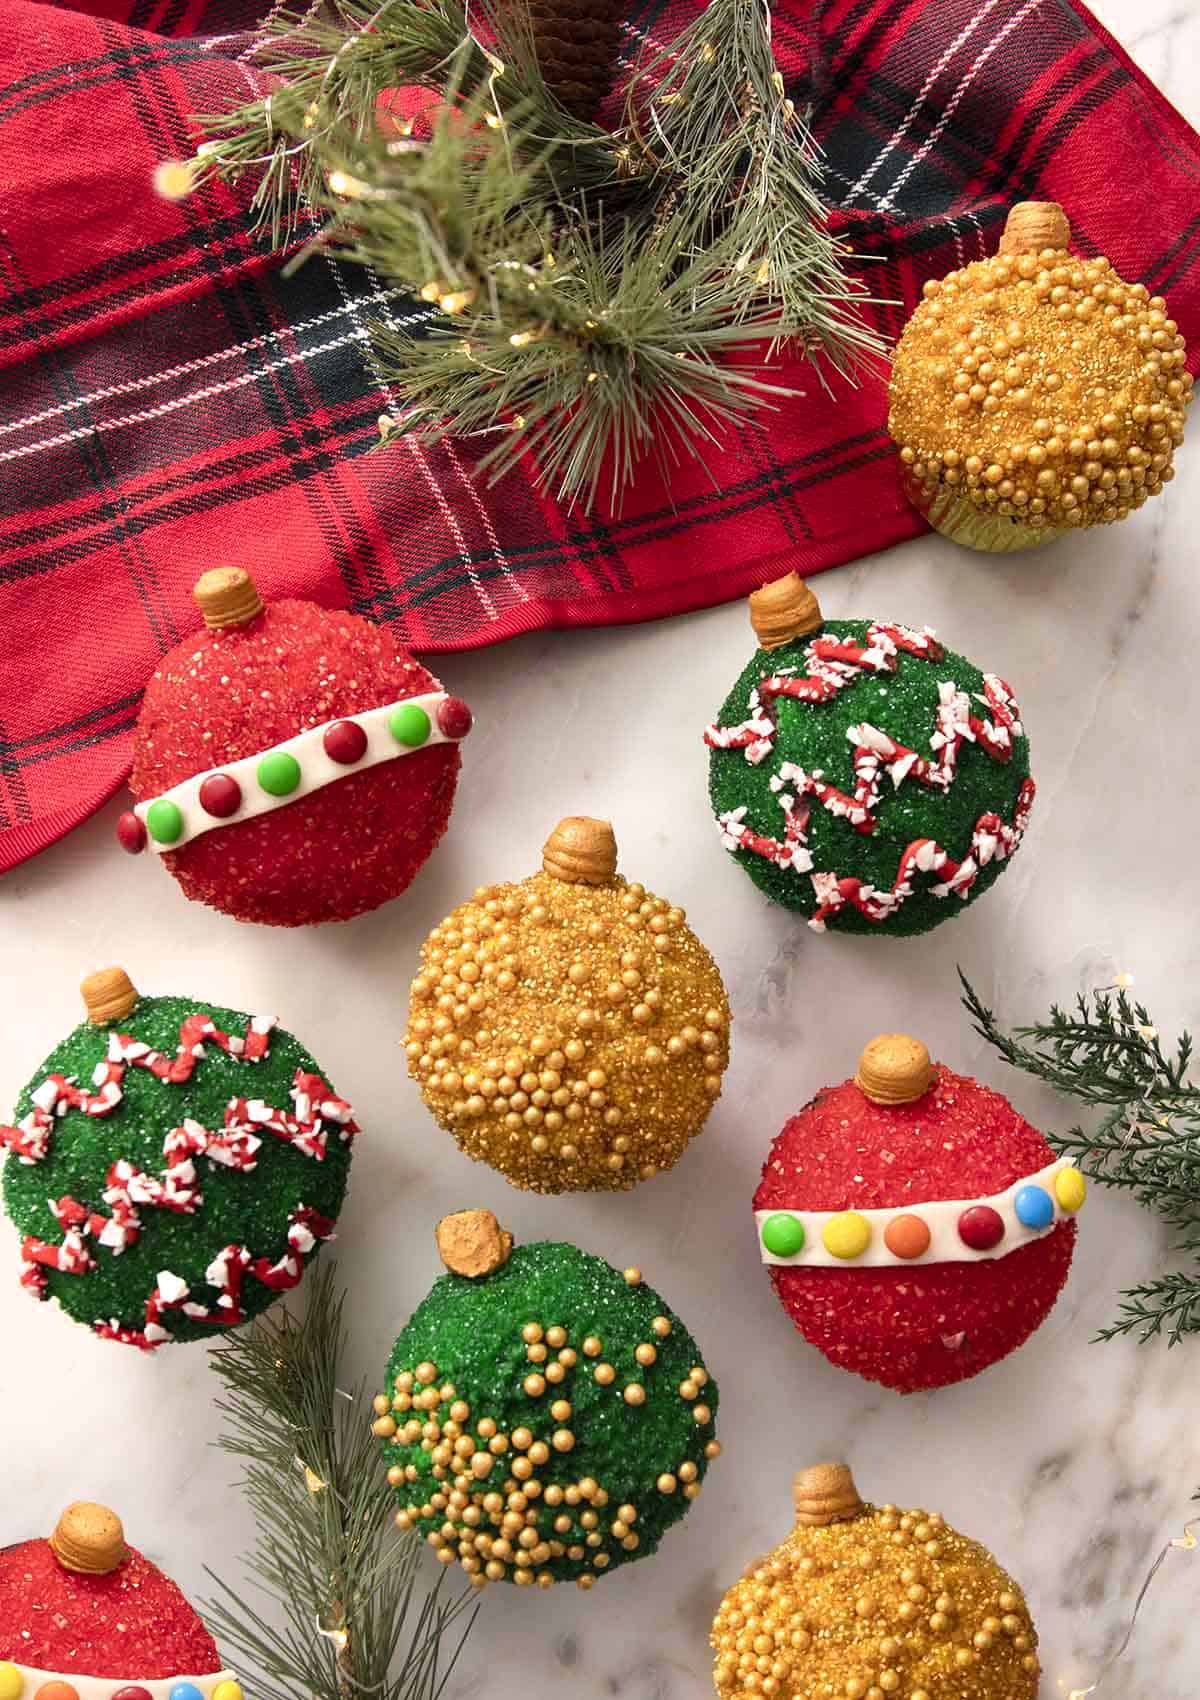 A group of cupcakes decorated as colorful Christmas ornaments.